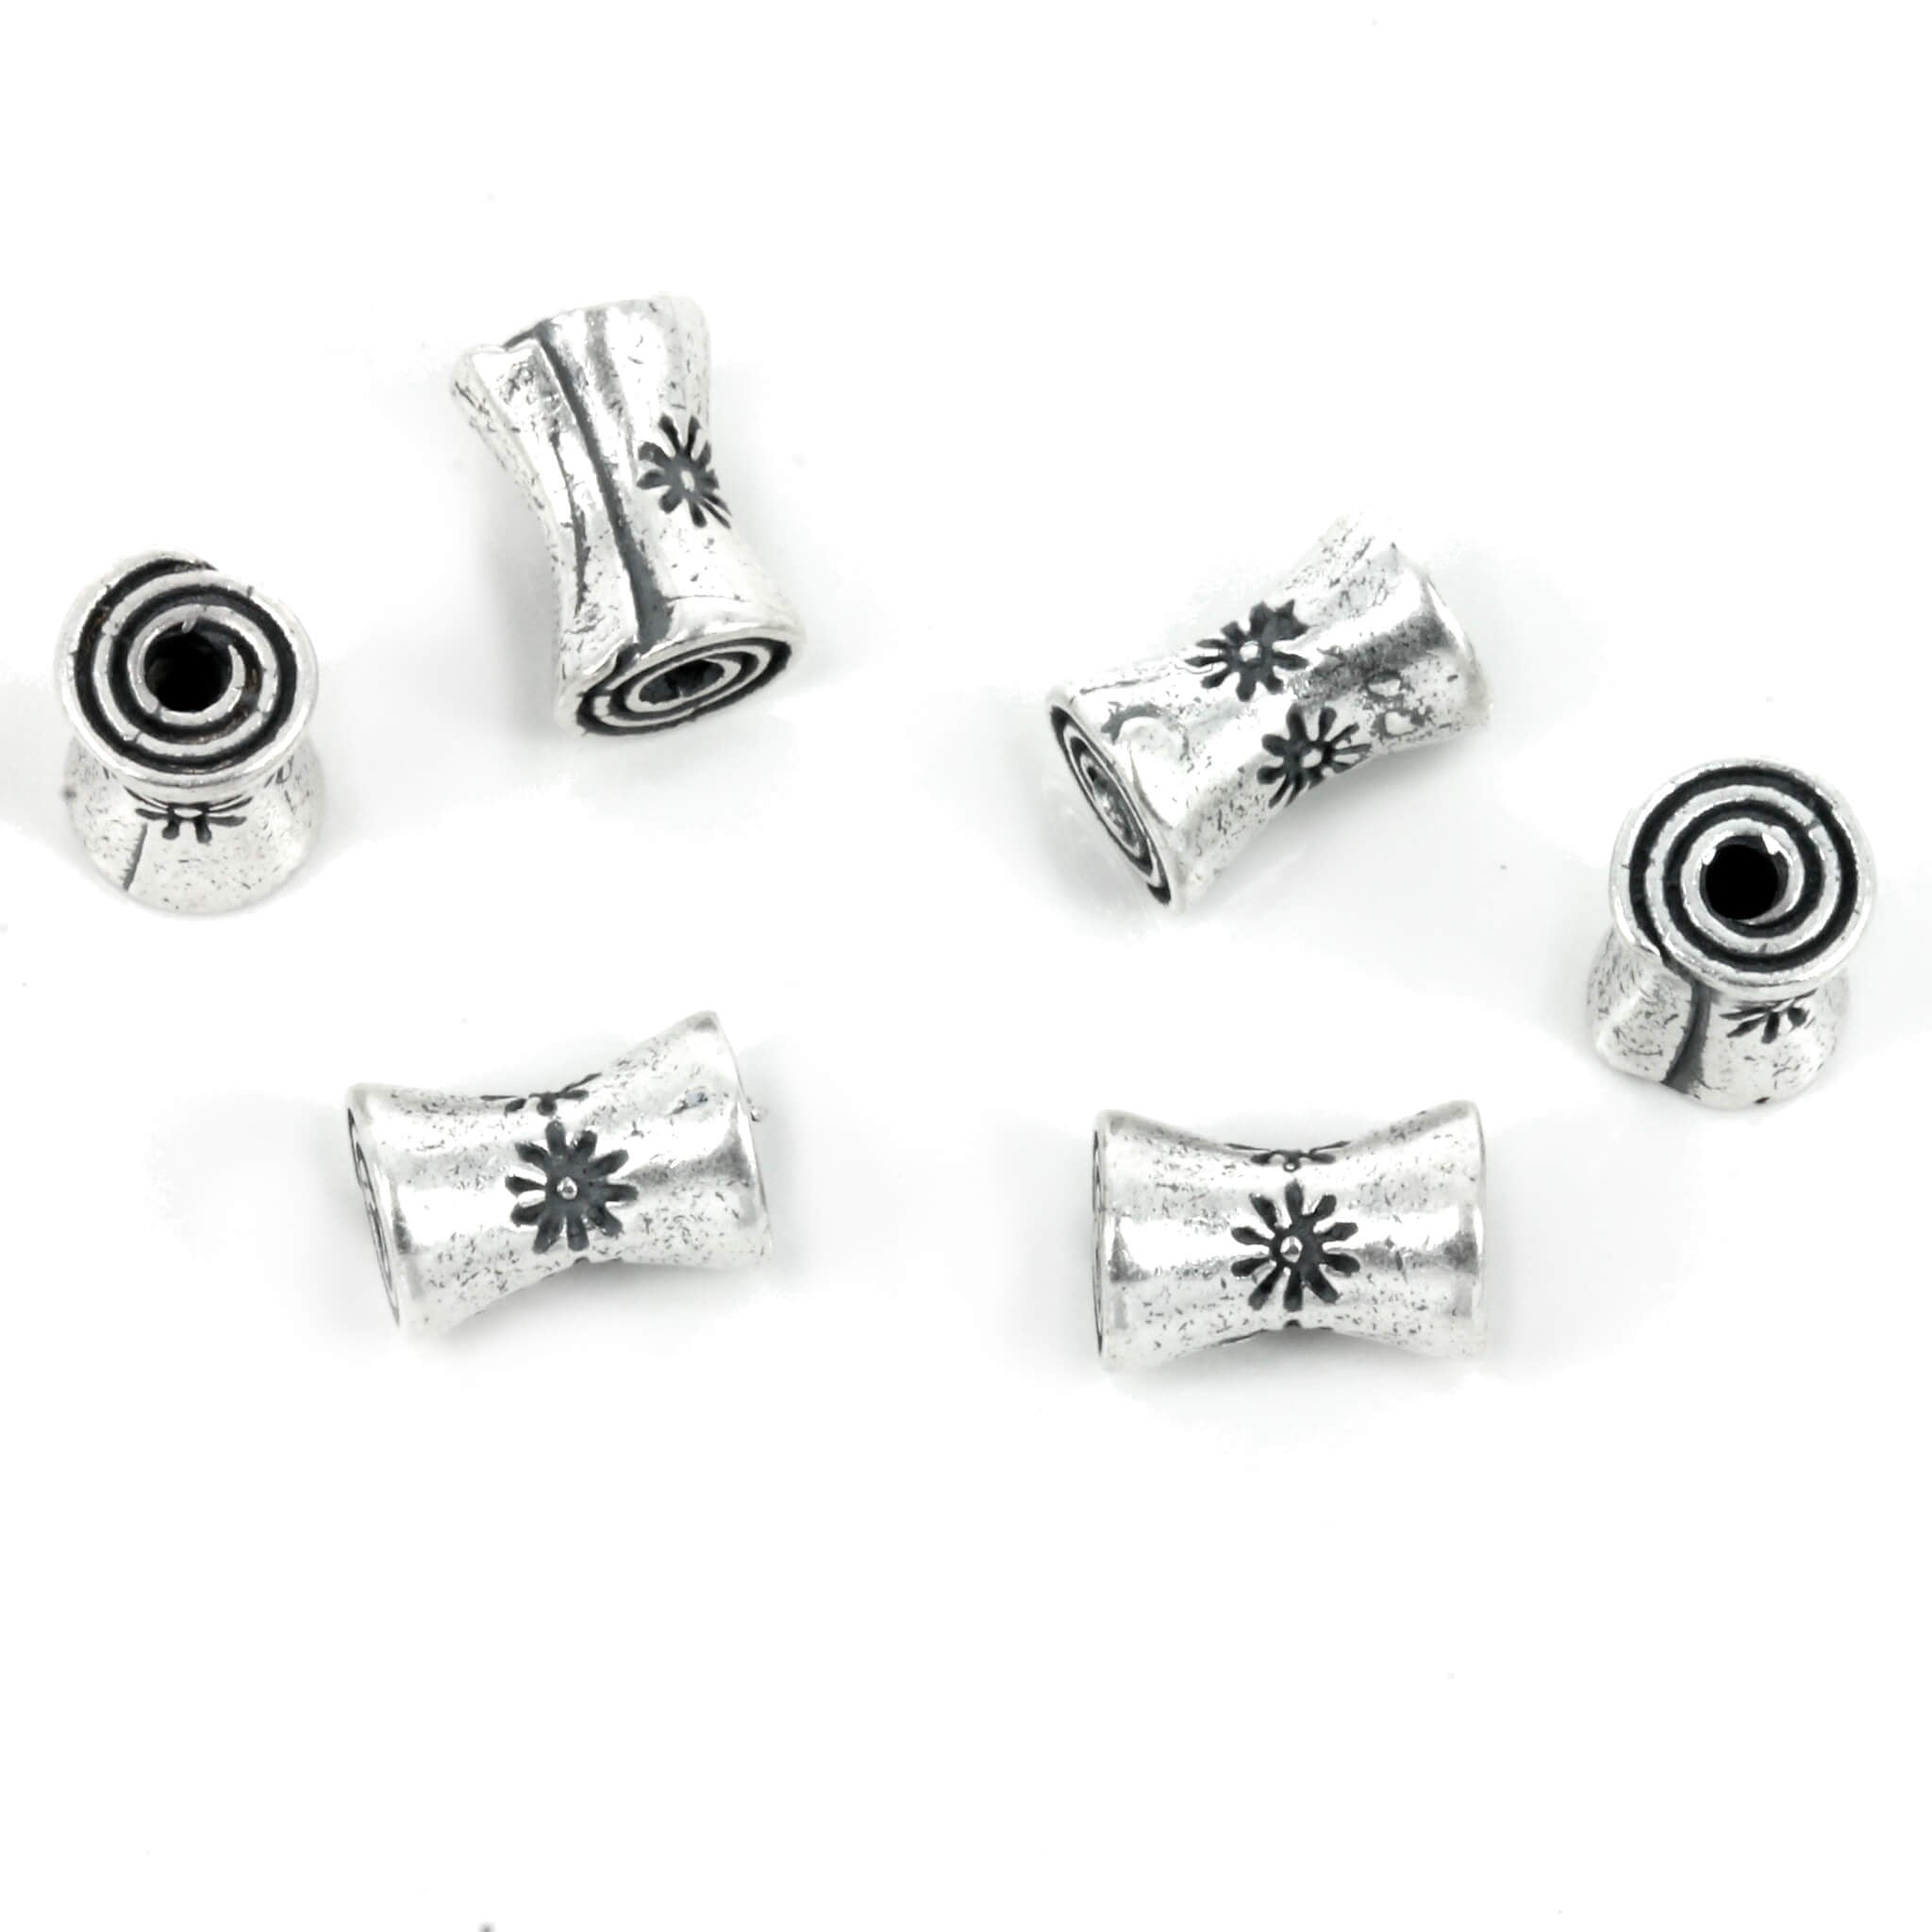 Roll-up Inverted Tube Bead in Matte Sterling Silver 6x9mm